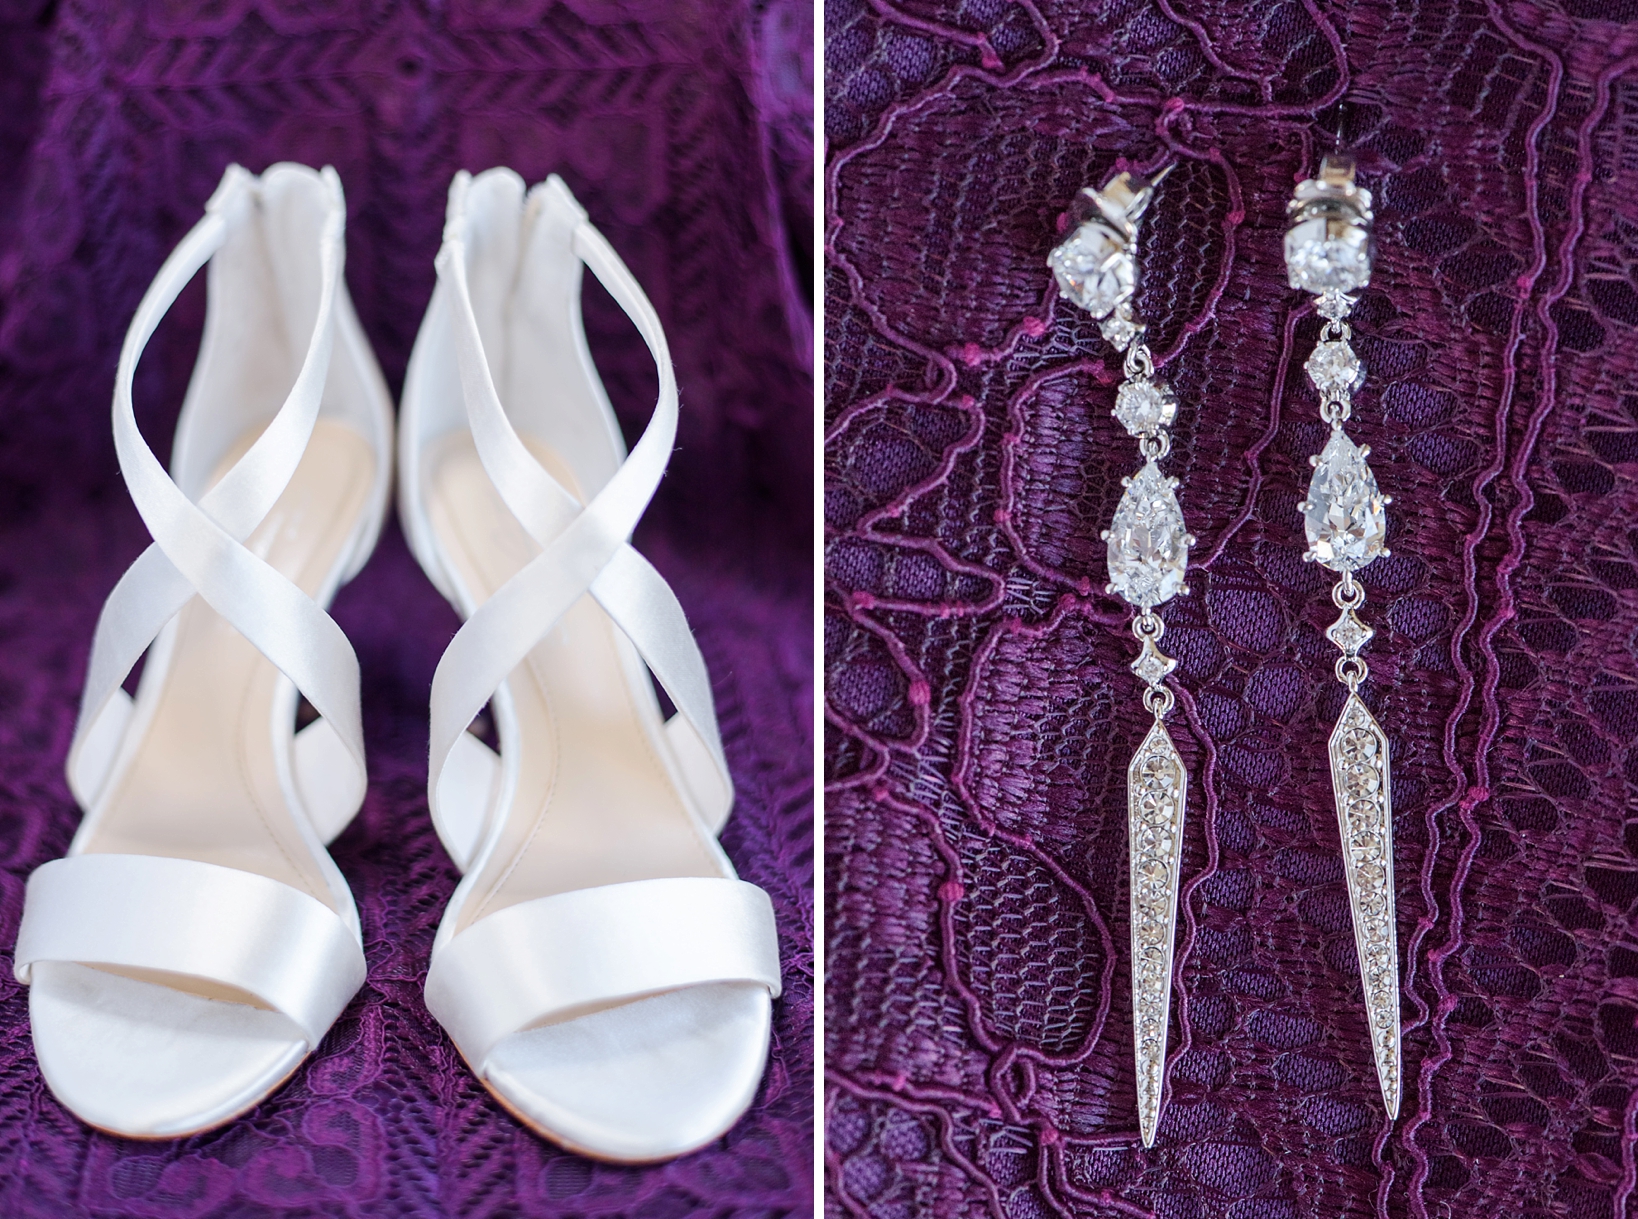 The bride's heels and earrings against a purple bridesmaid dress